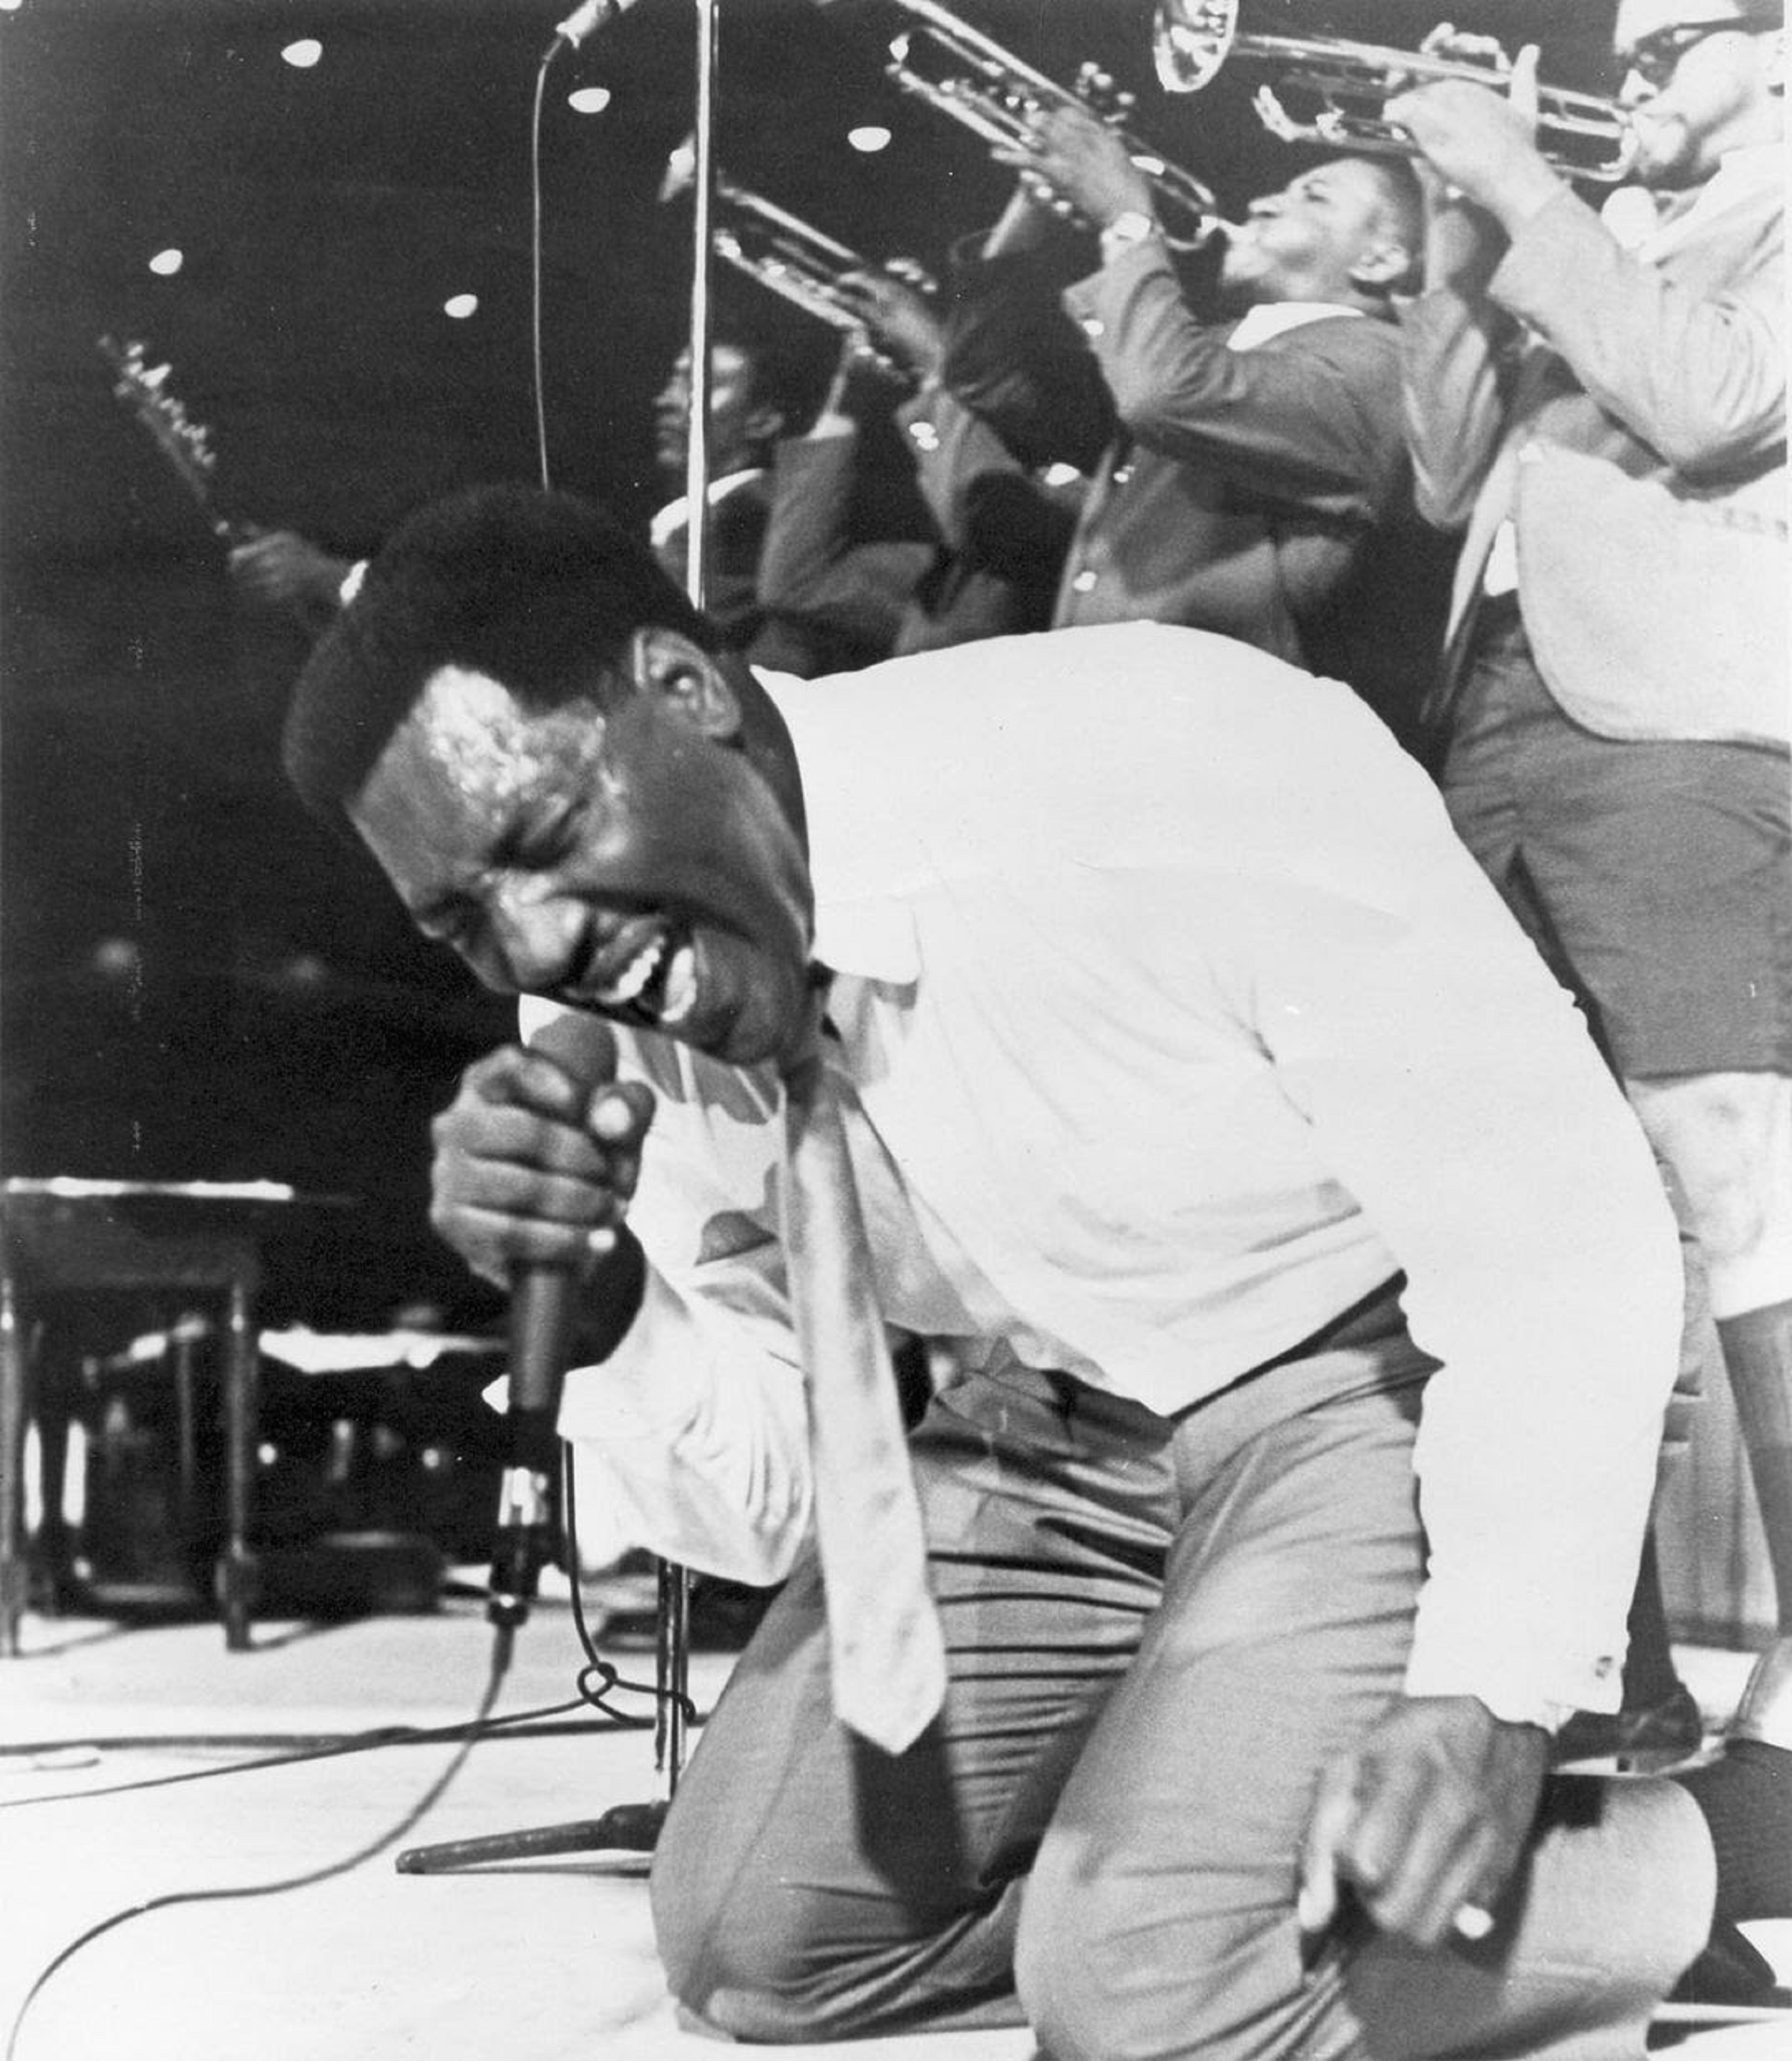 Remembering The Legendary Artist Otis Redding 56 Years after His Untimely Passing